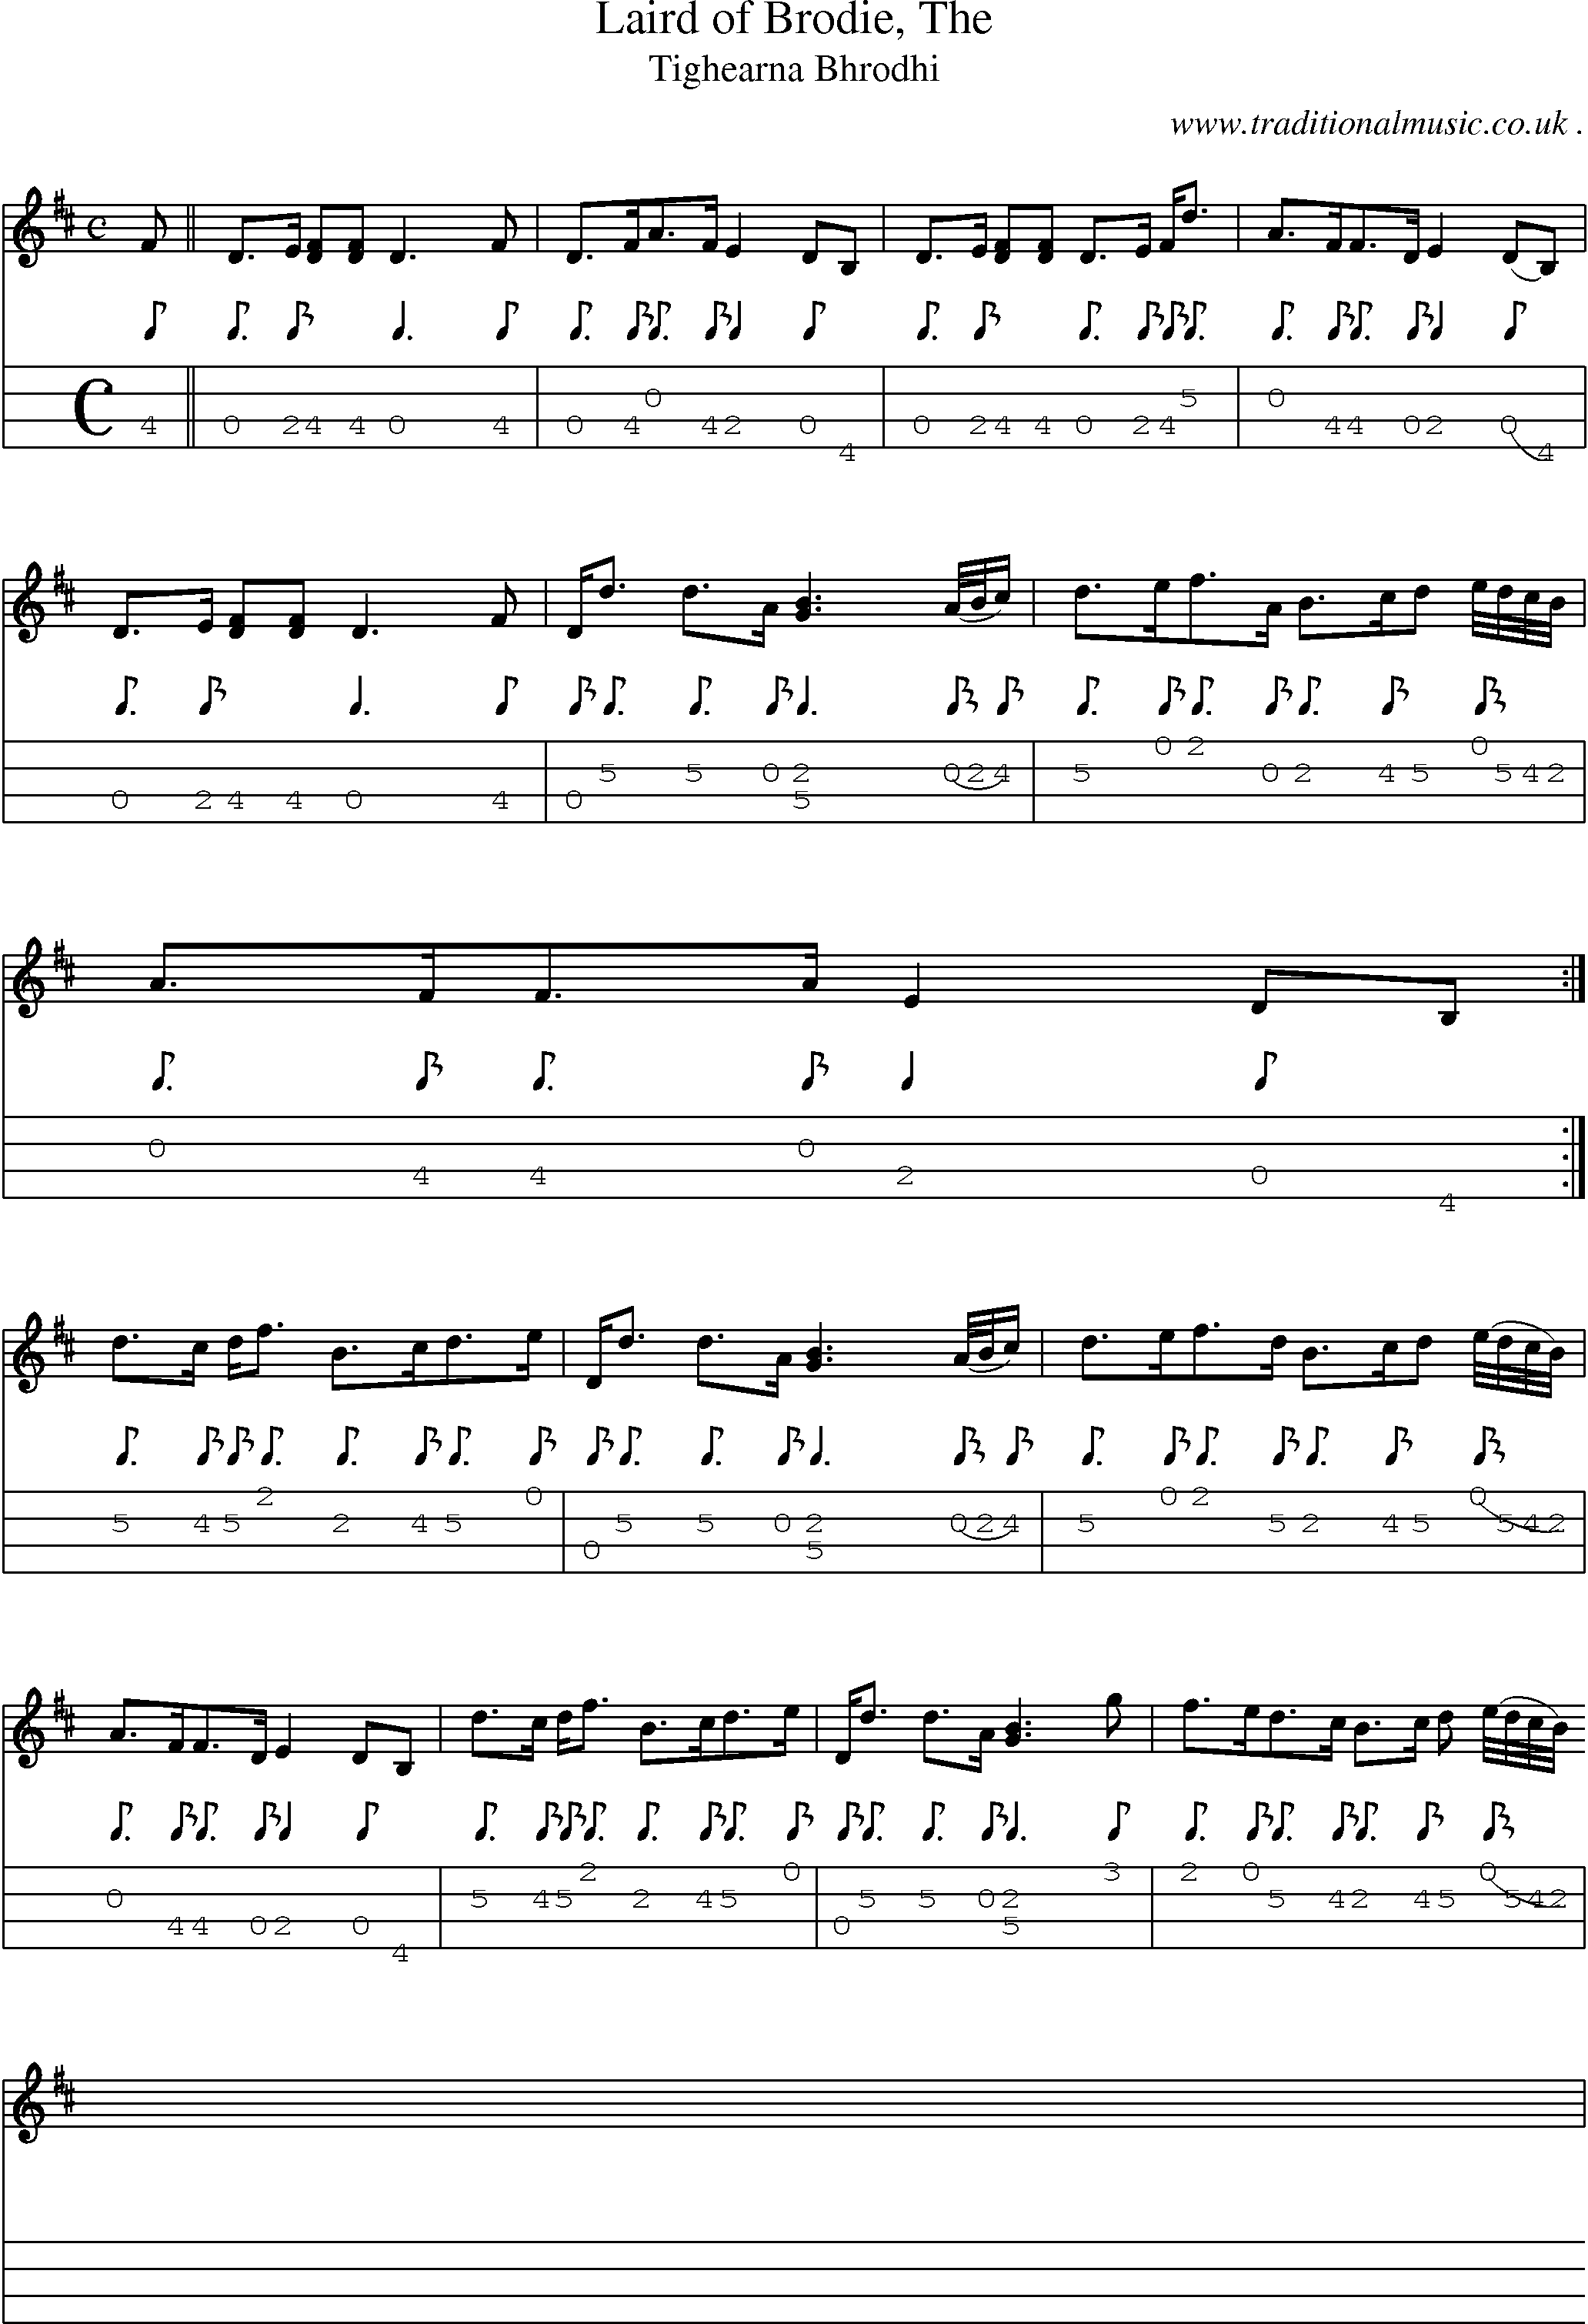 Sheet-music  score, Chords and Mandolin Tabs for Laird Of Brodie The